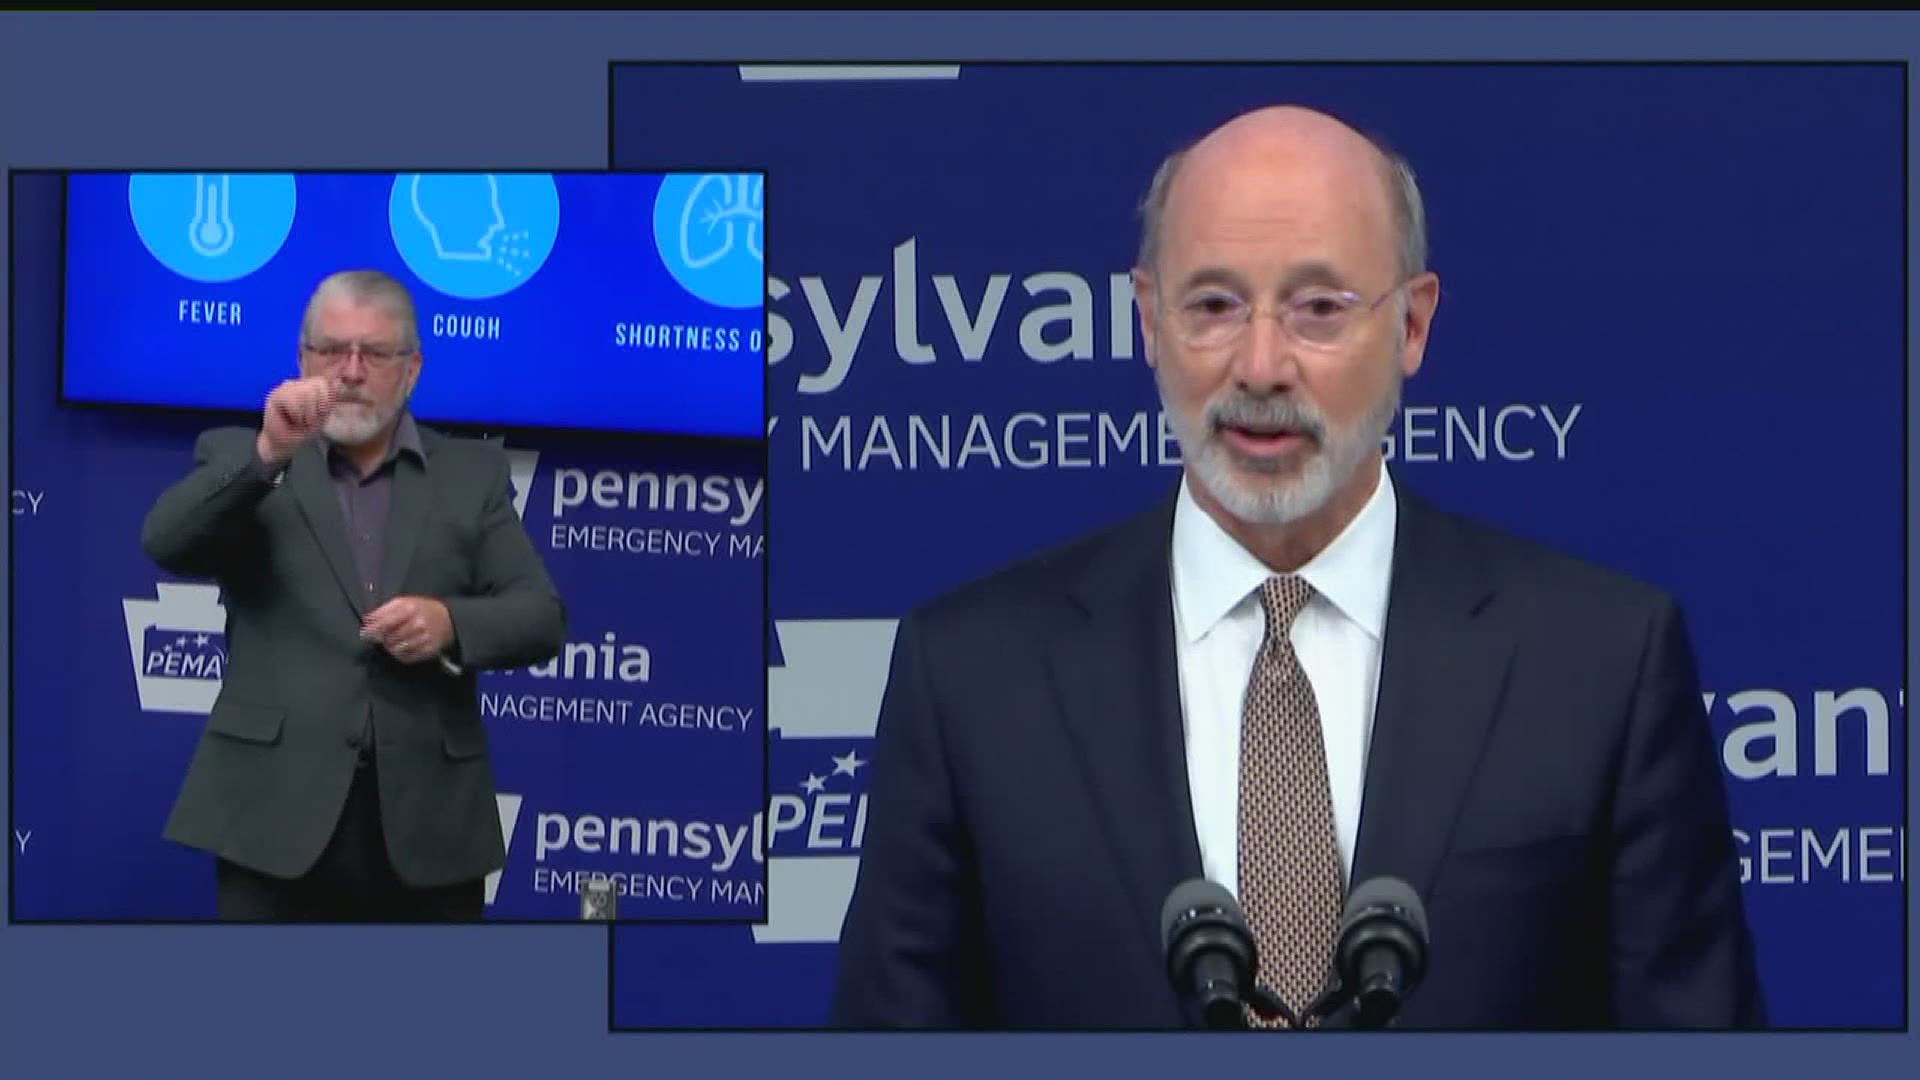 Governor Tom Wolf said at a press conference today that his recommendation is no high school sports be played until January 2021 amid the coronavirus pandemic.